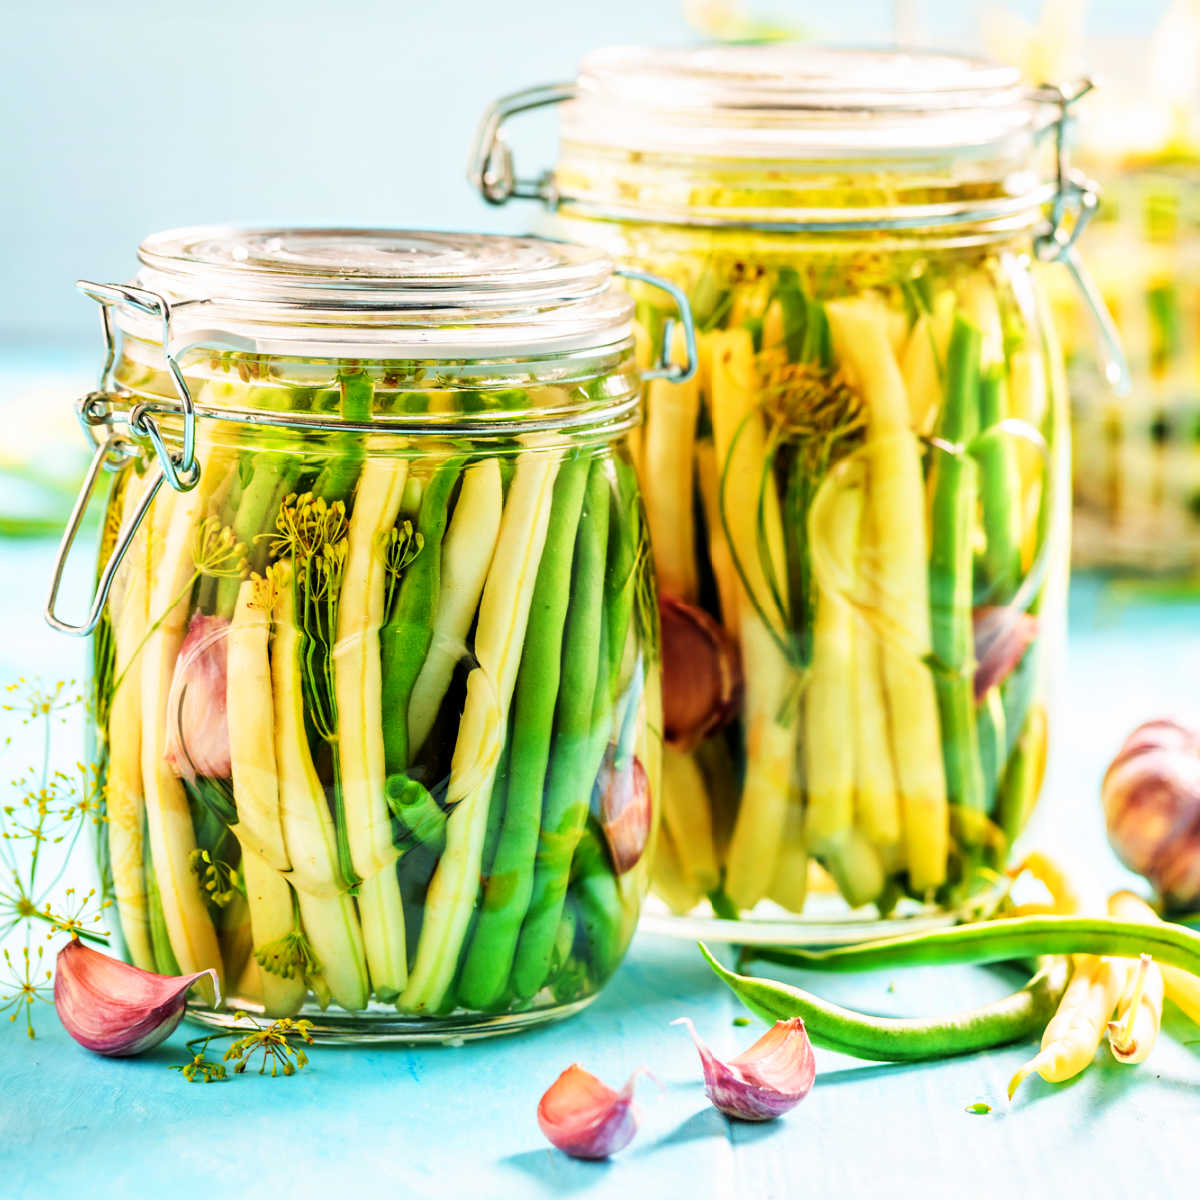 Green beans and wax beans pickled as dilly beans in glass canning jars